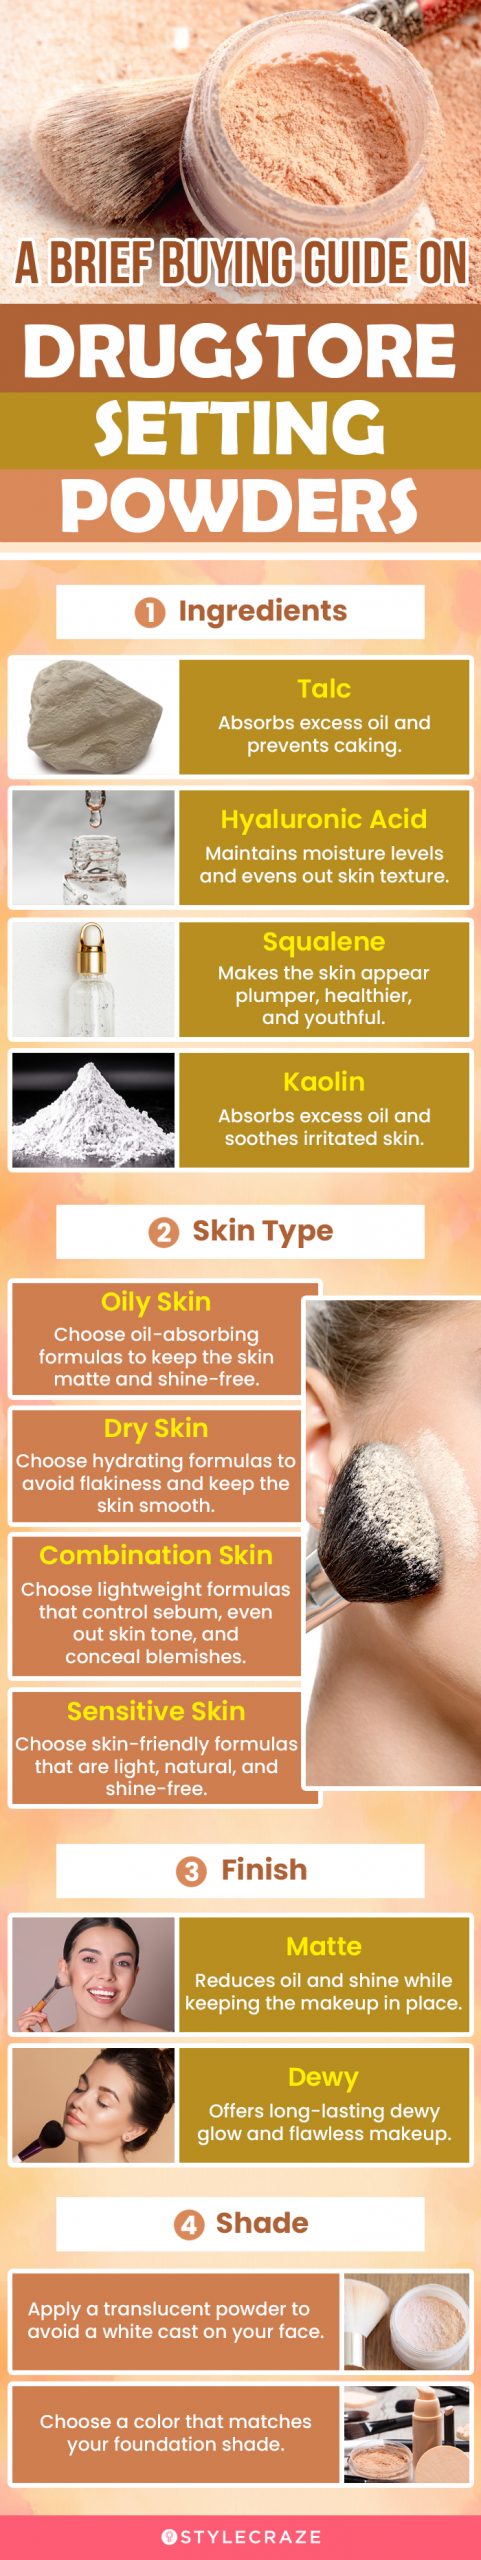 A Brief Buying Guide On Drugstore Setting Powders (infographic)